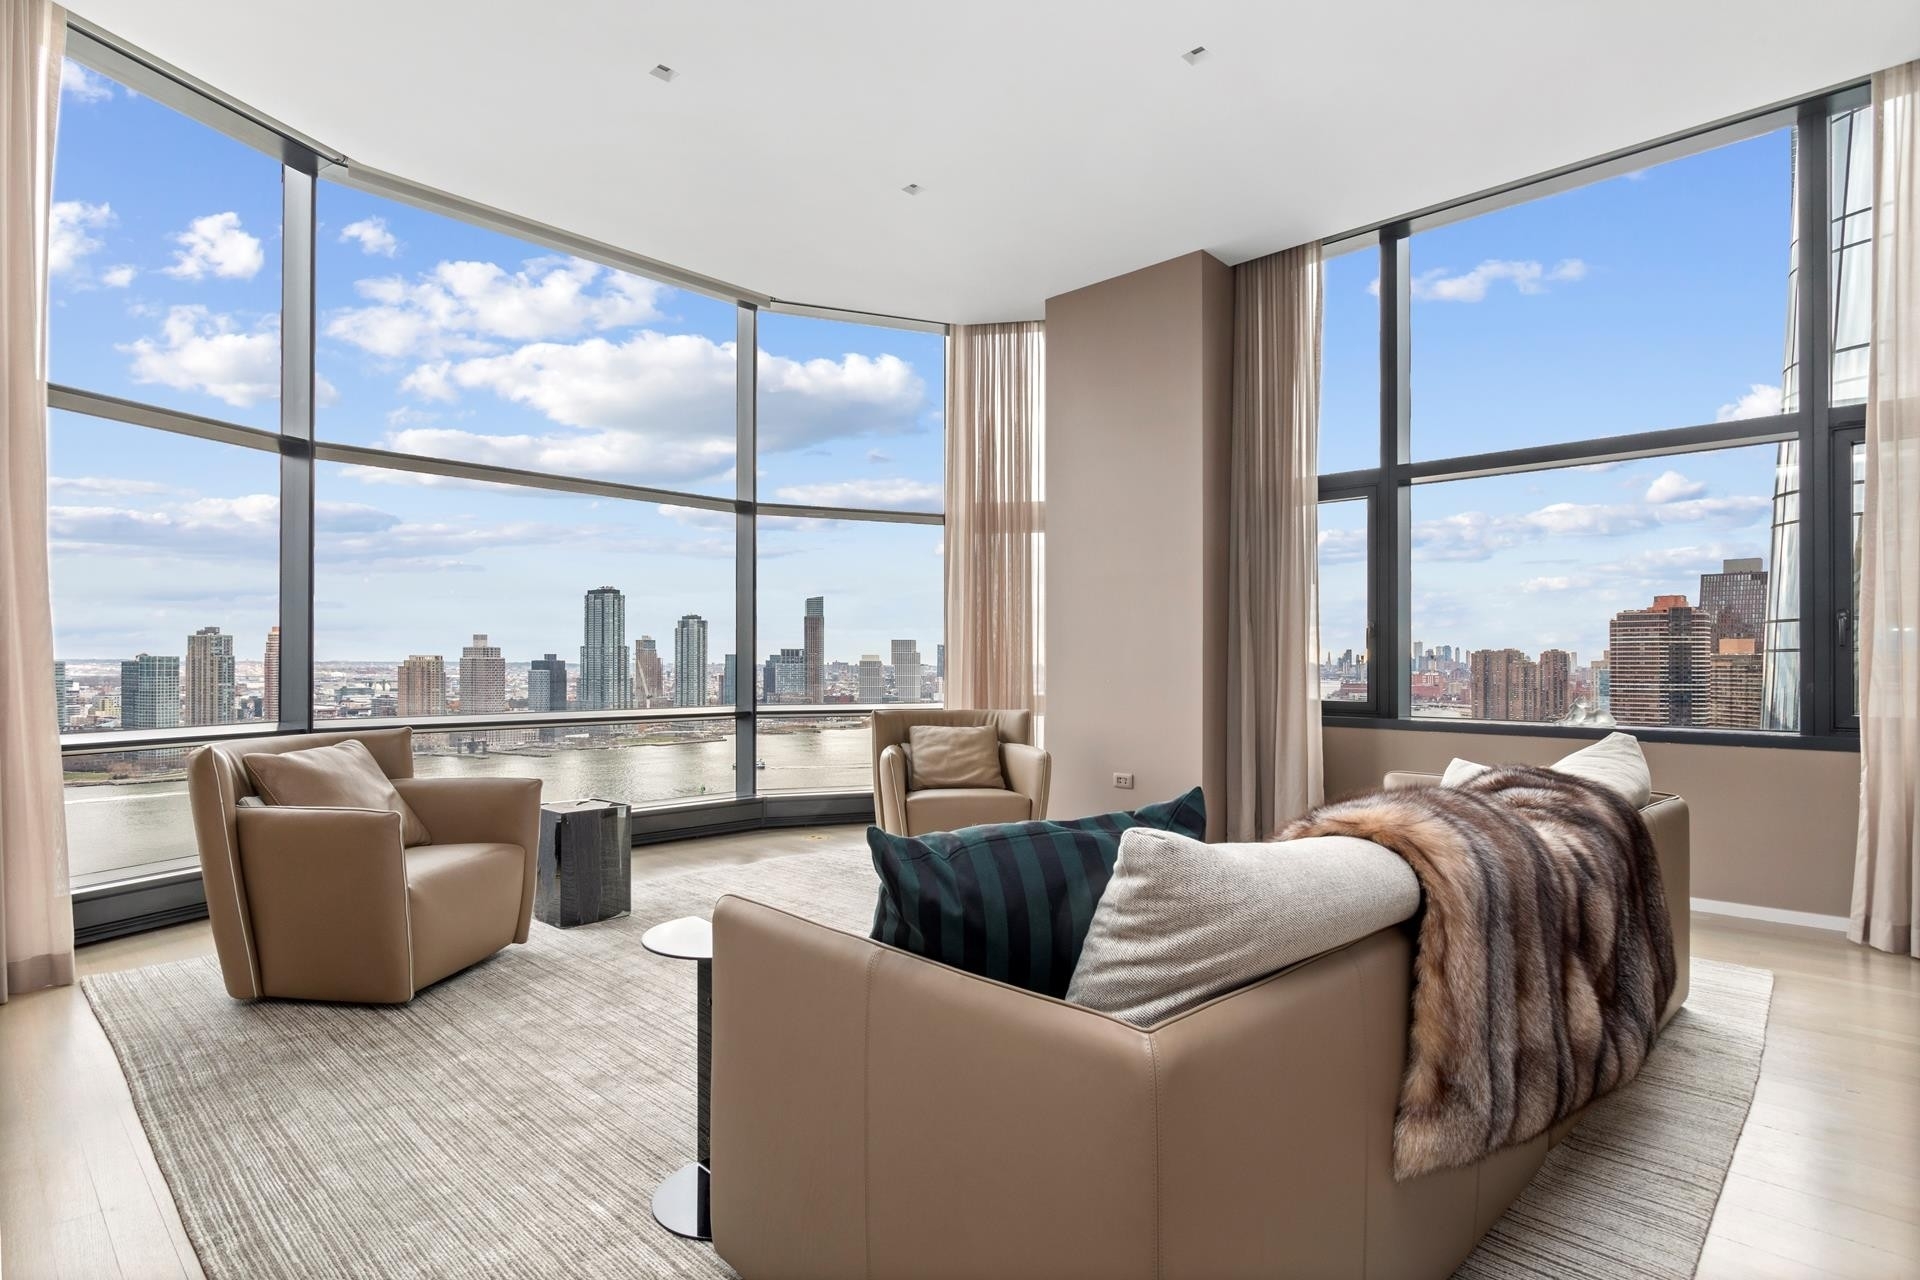 Condominium for Sale at 50 UNITED NATIONS PLZ, 27A Turtle Bay, New York, NY 10017